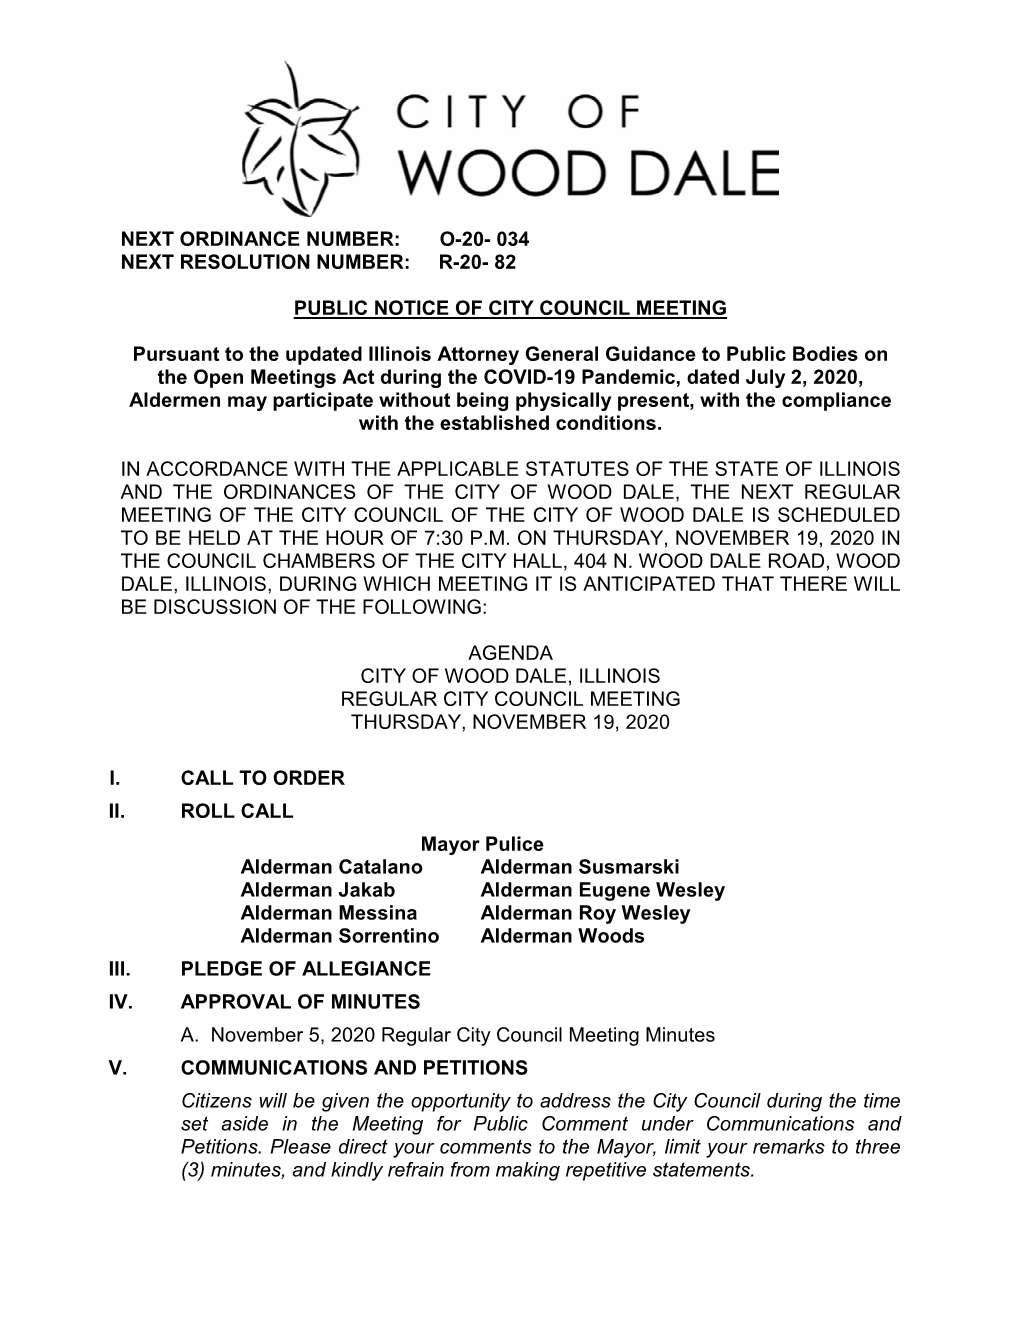 NEXT ORDINANCE NUMBER: O-20- 034 NEXT RESOLUTION NUMBER: R-20- 82 PUBLIC NOTICE of CITY COUNCIL MEETING Pursuant To